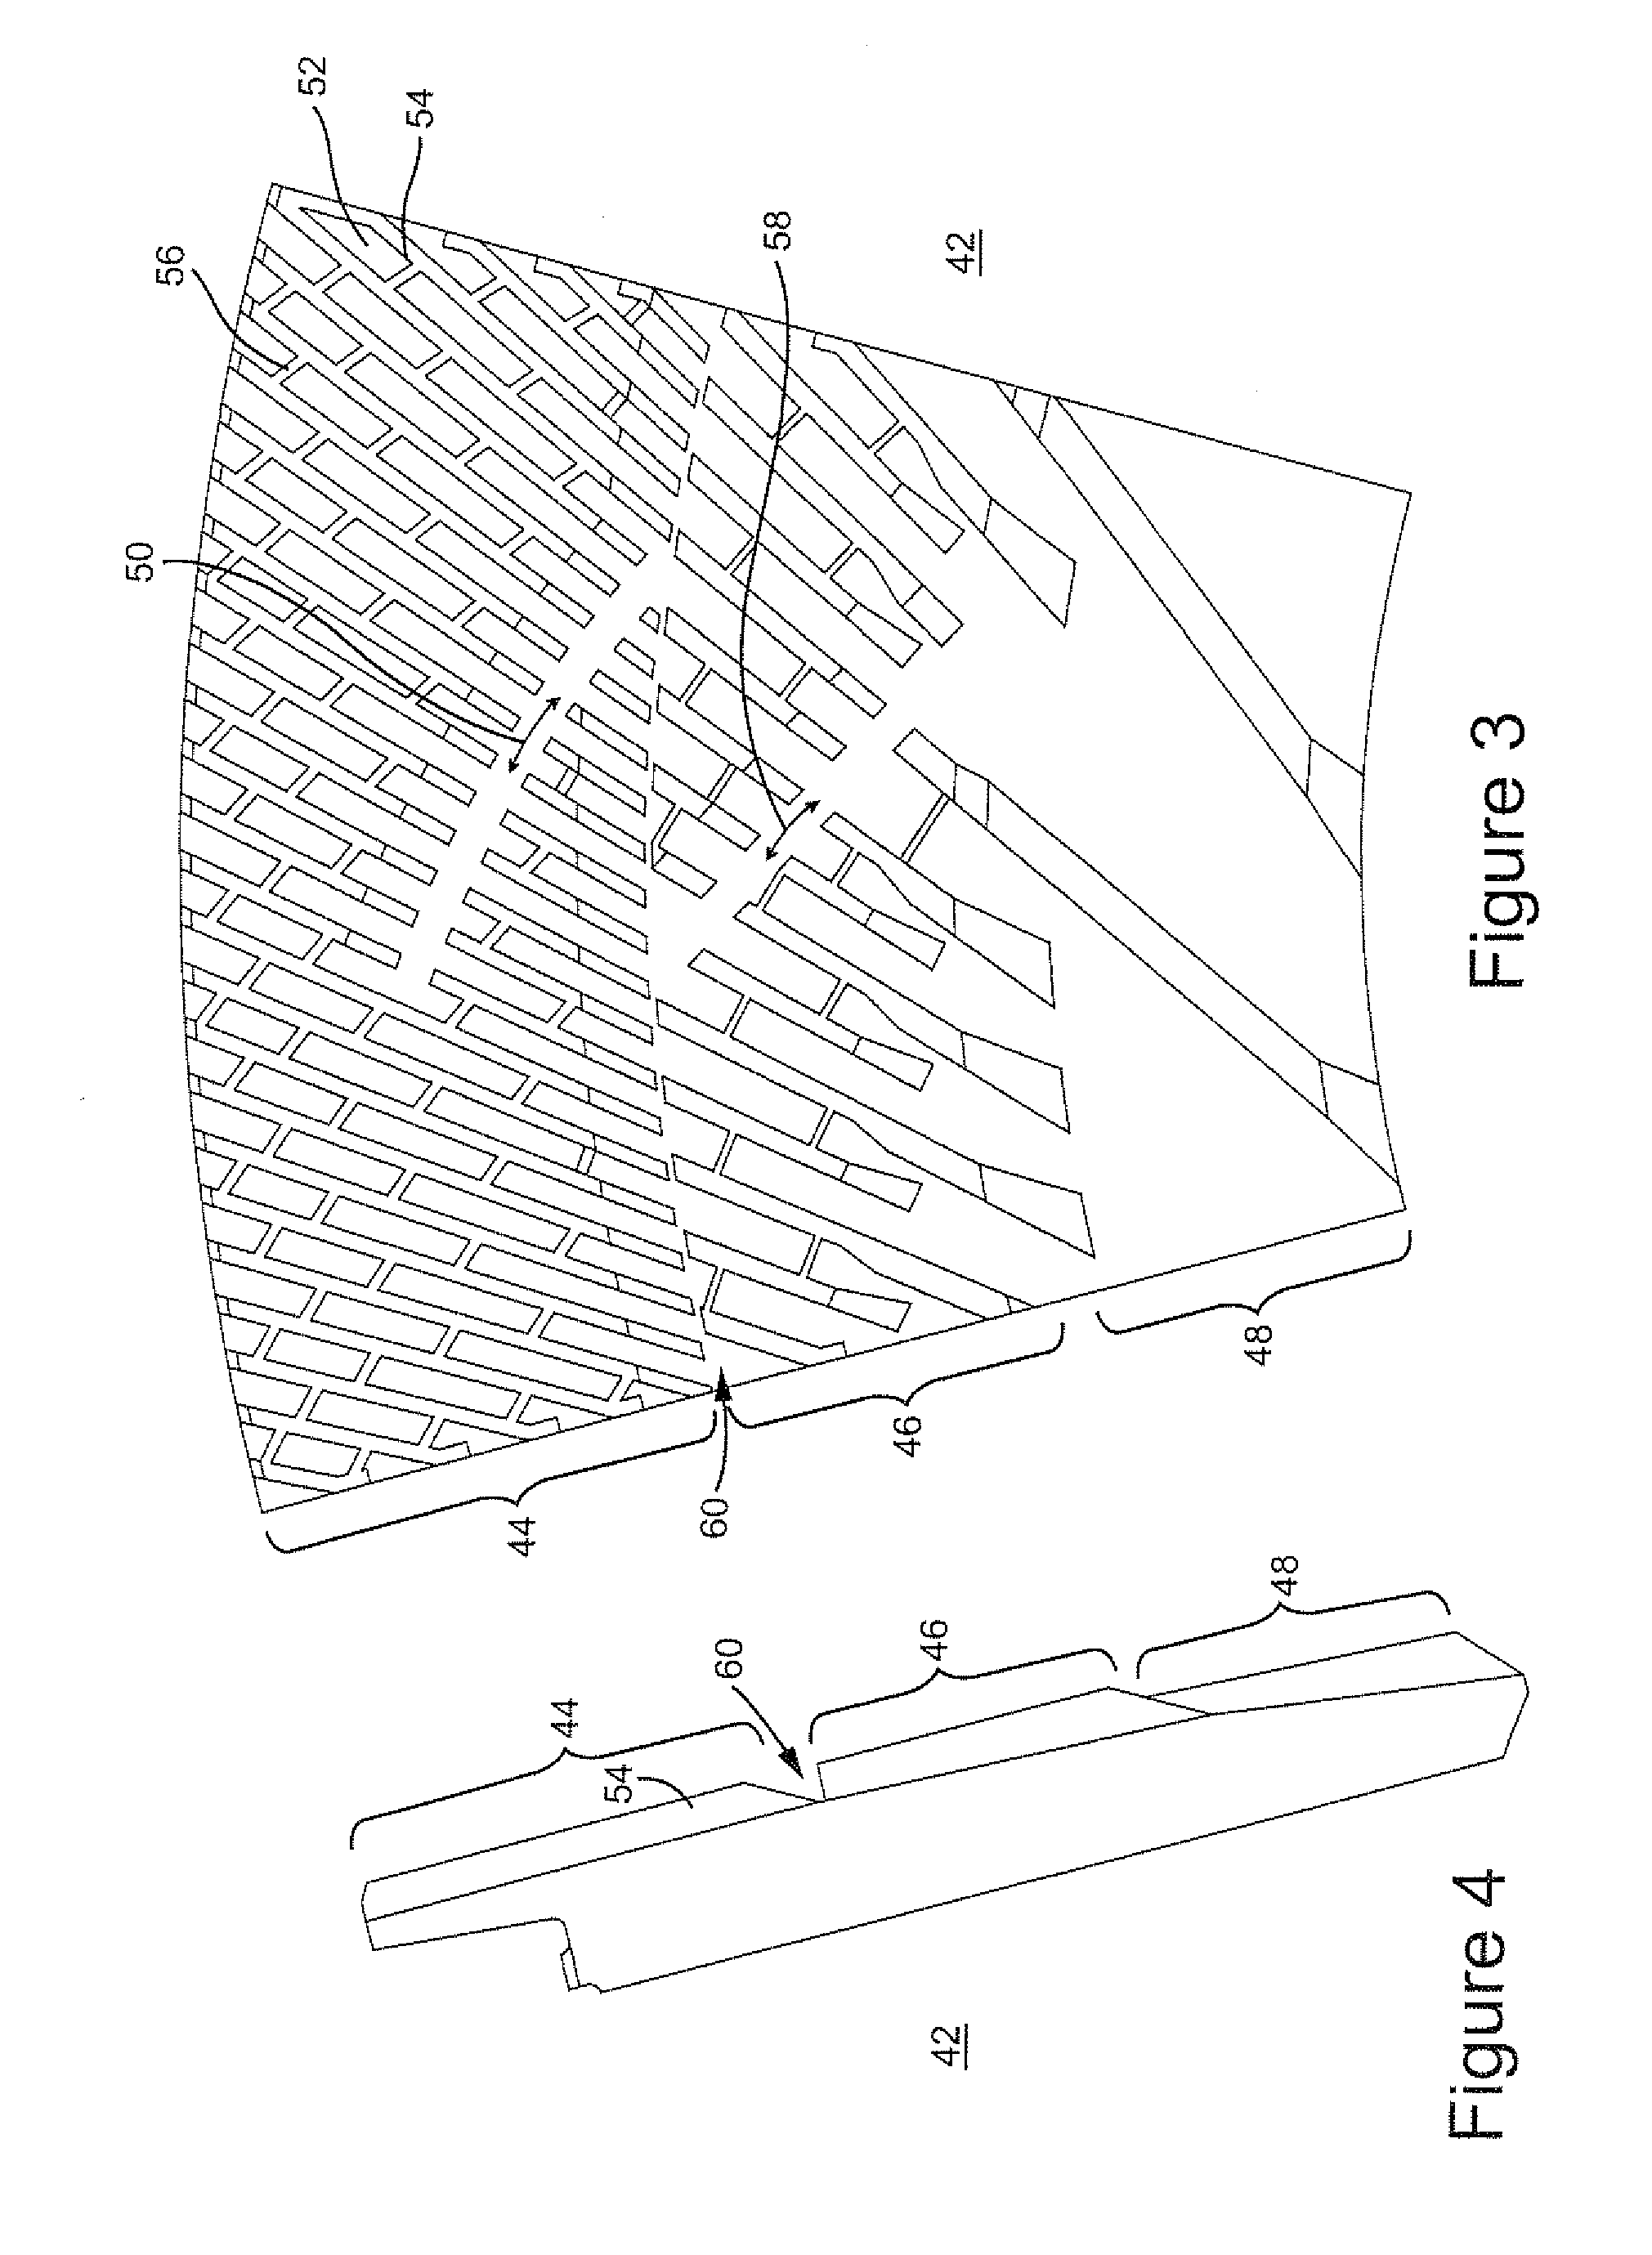 Refiner plates having steam channels and method for extracting backflow steam from a disk refiner